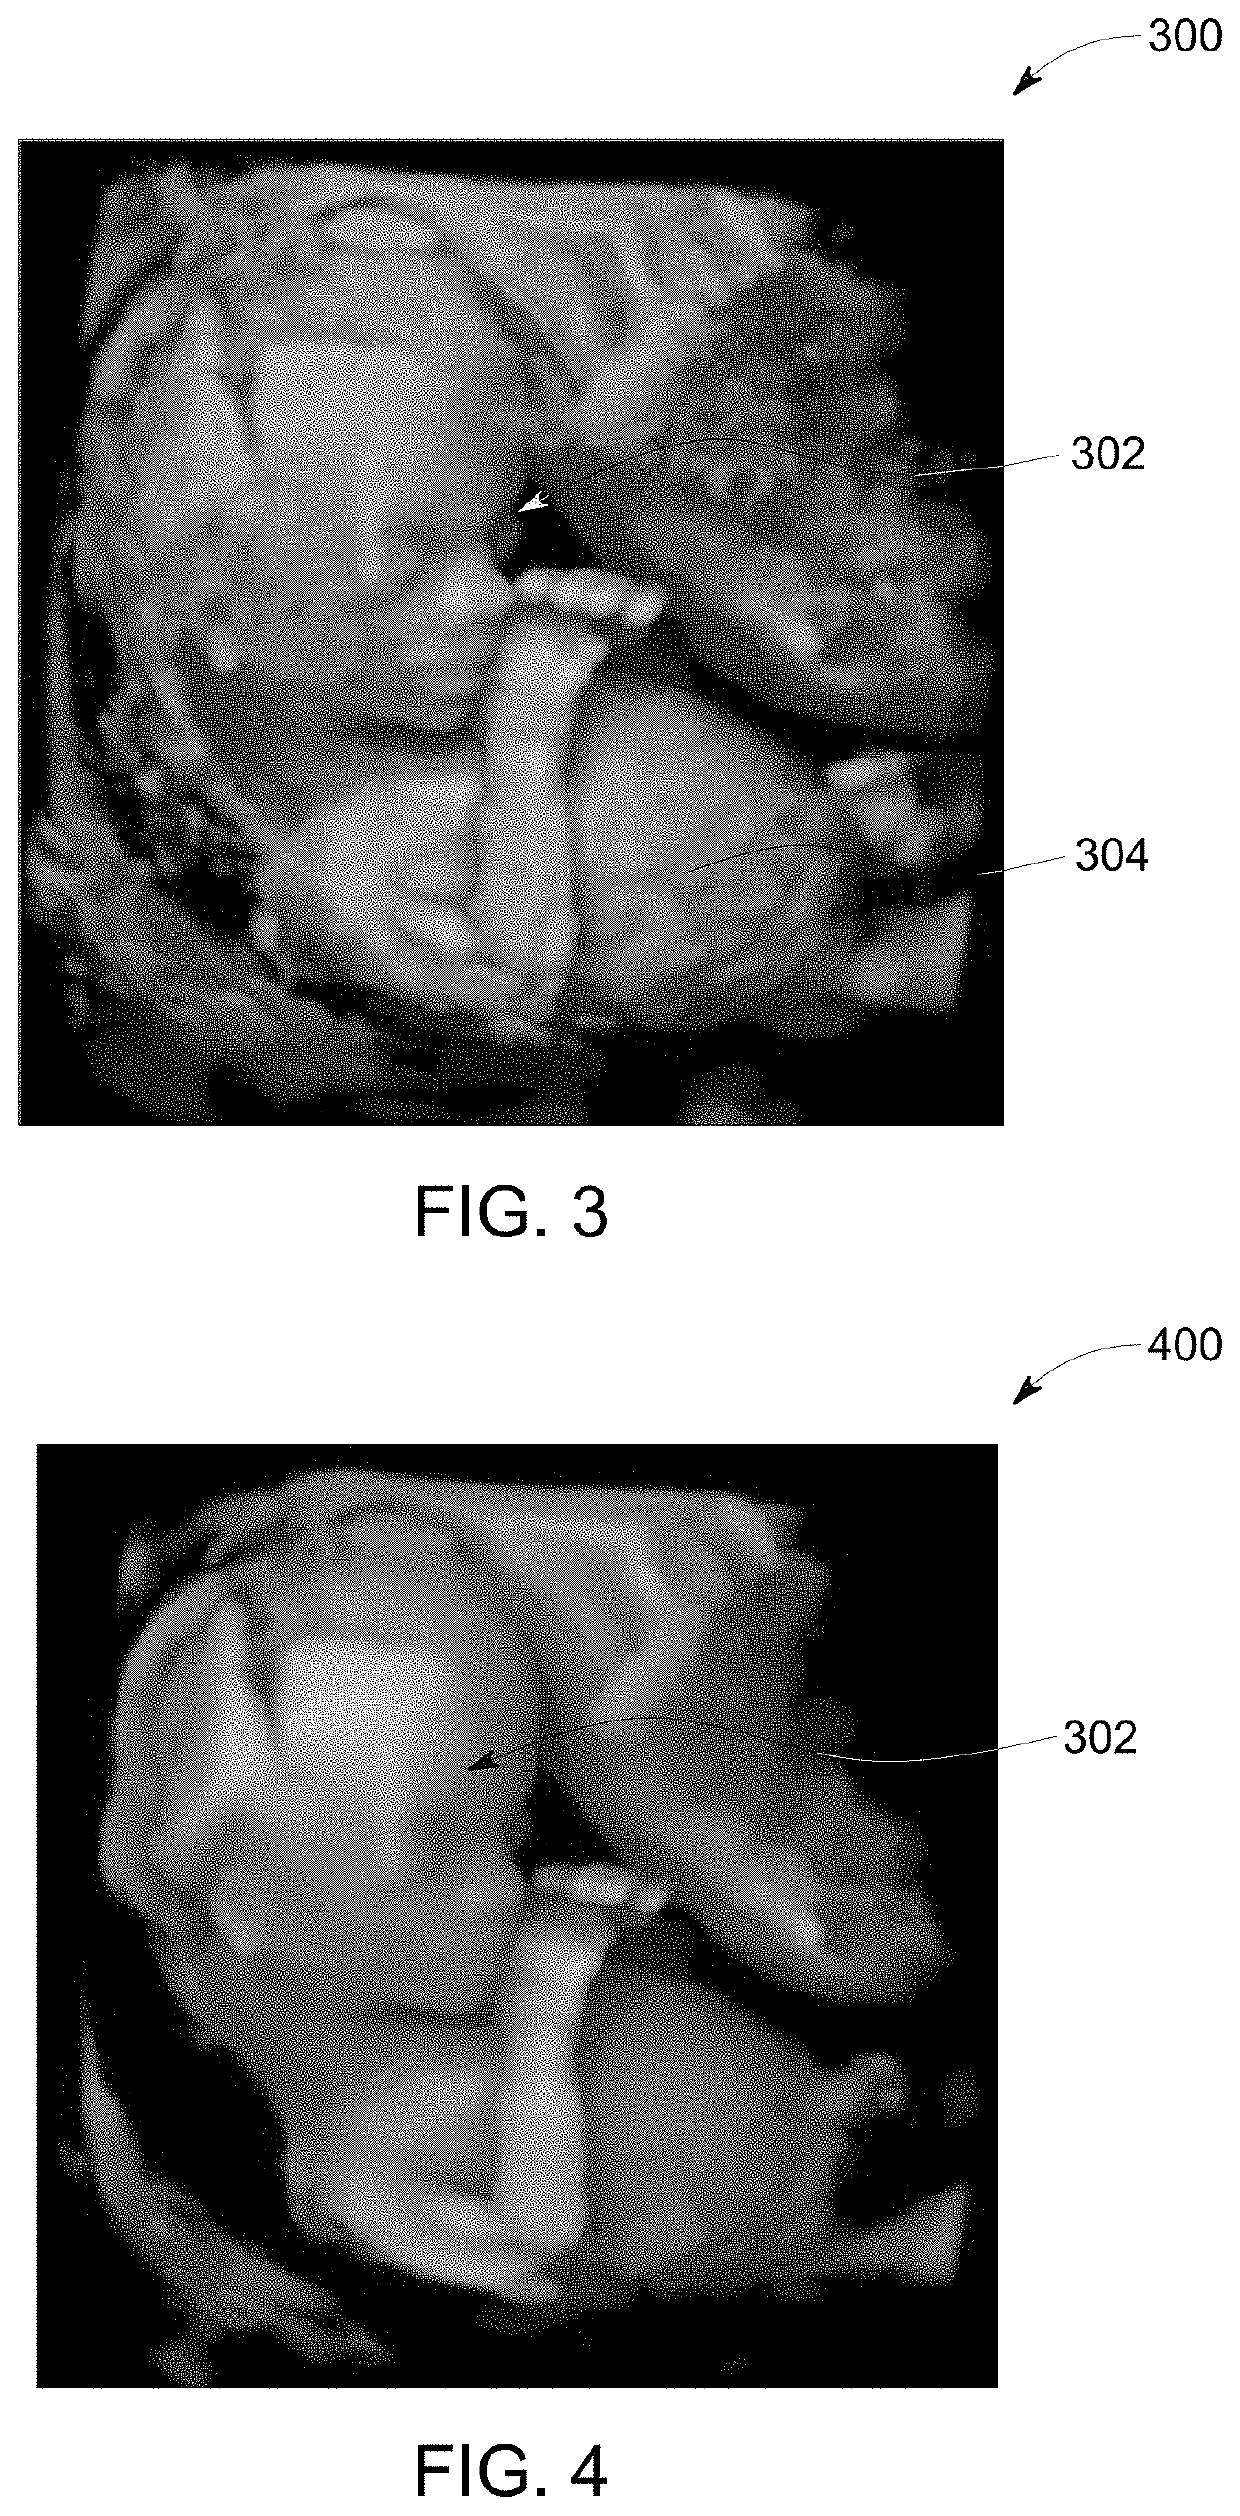 Imaging system and method providing scalable resolution in multi-dimensional image data